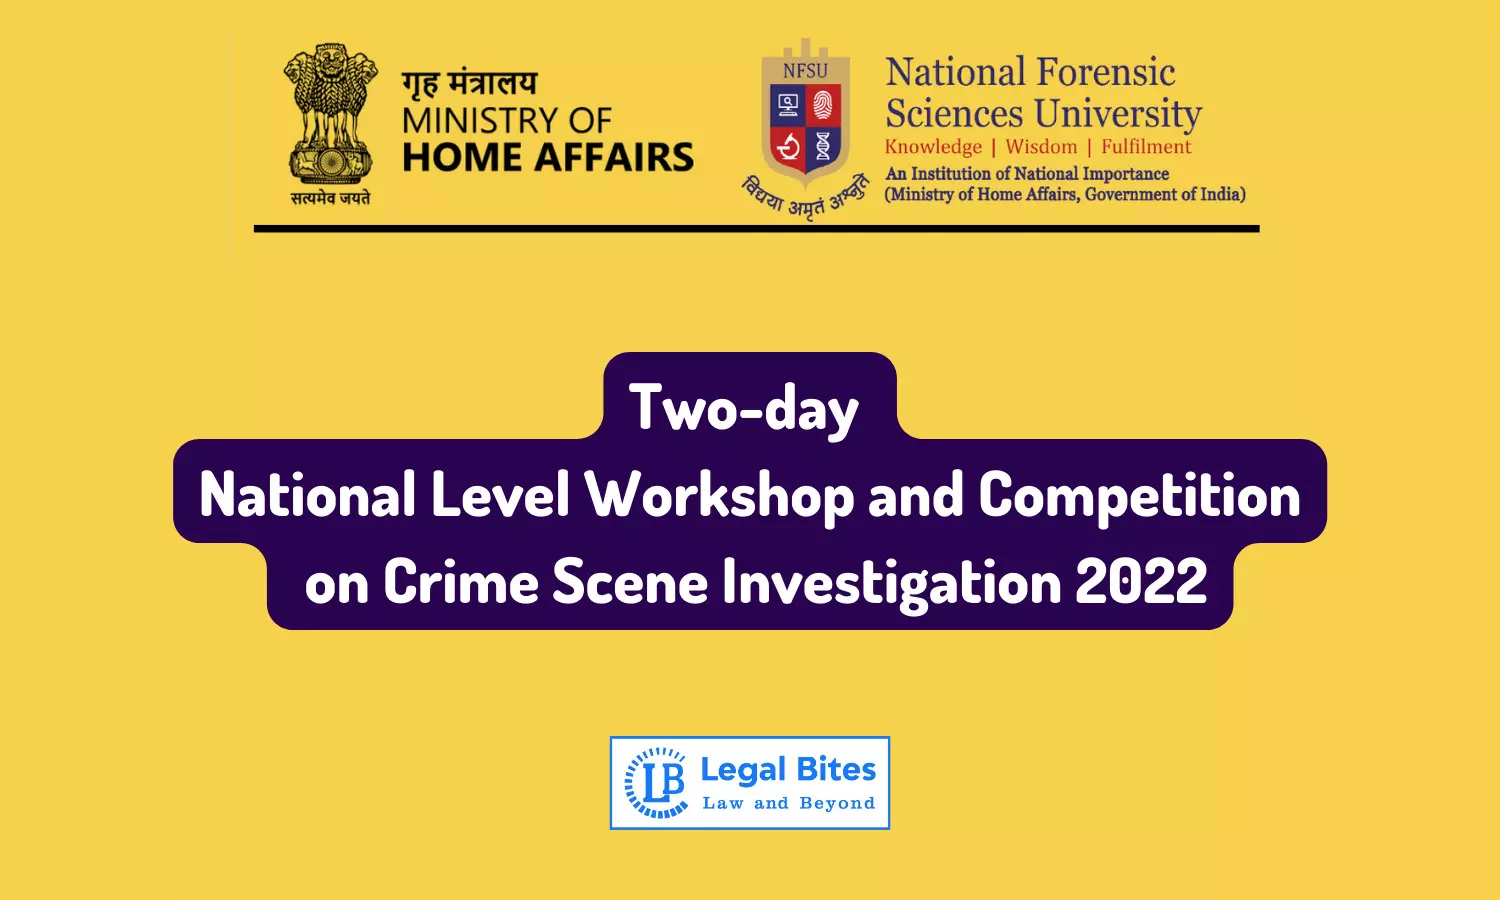 Two-day National Level Workshop and Competition on Crime Scene Investigation 2022 | National Forensic Sciences University